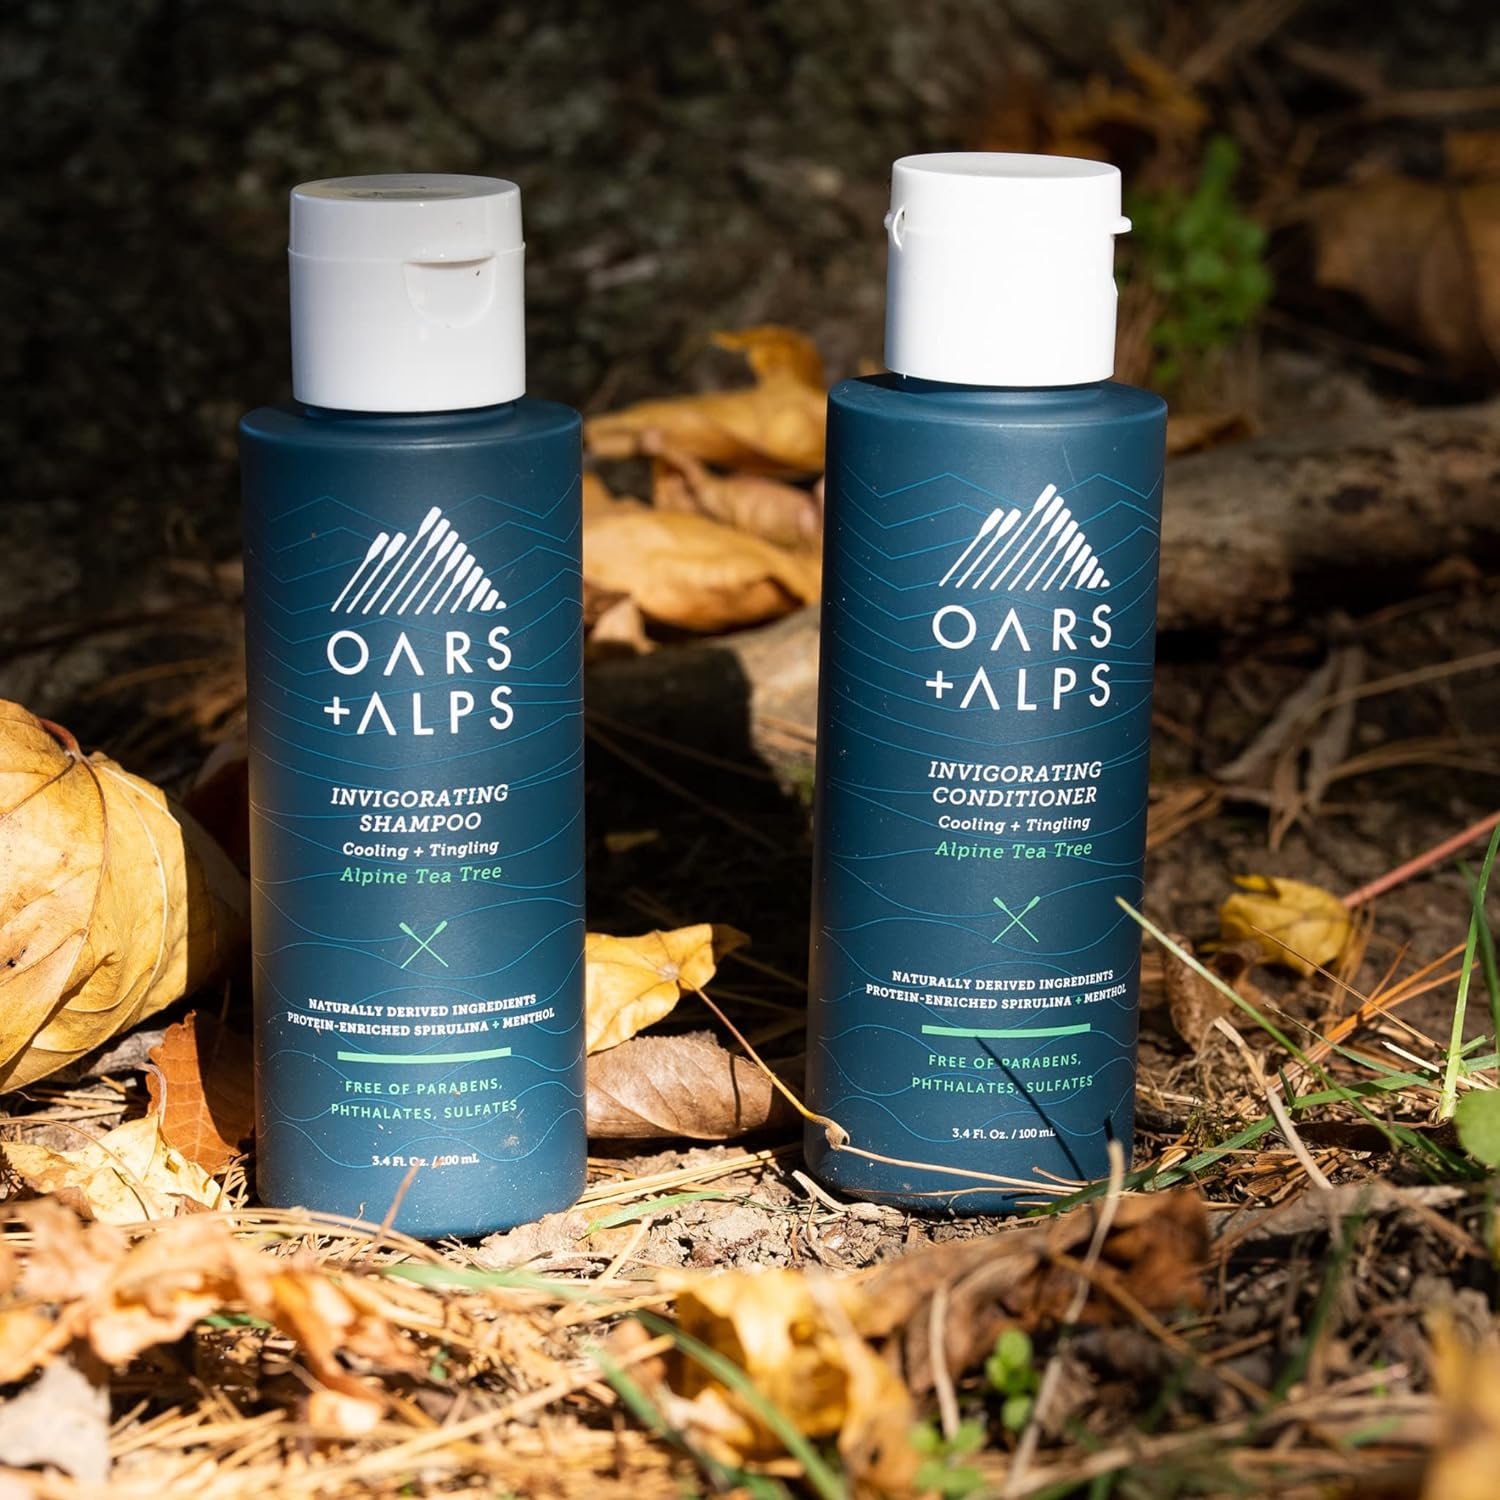 Oars + Alps Hair and Body Travel Size Kit for Men, Includes Sulfate Free Shampoo, Conditioner, Body Wash, Deodorant, and Reusable Pouch, TSA Approved, Alpine Tea Tree Scent